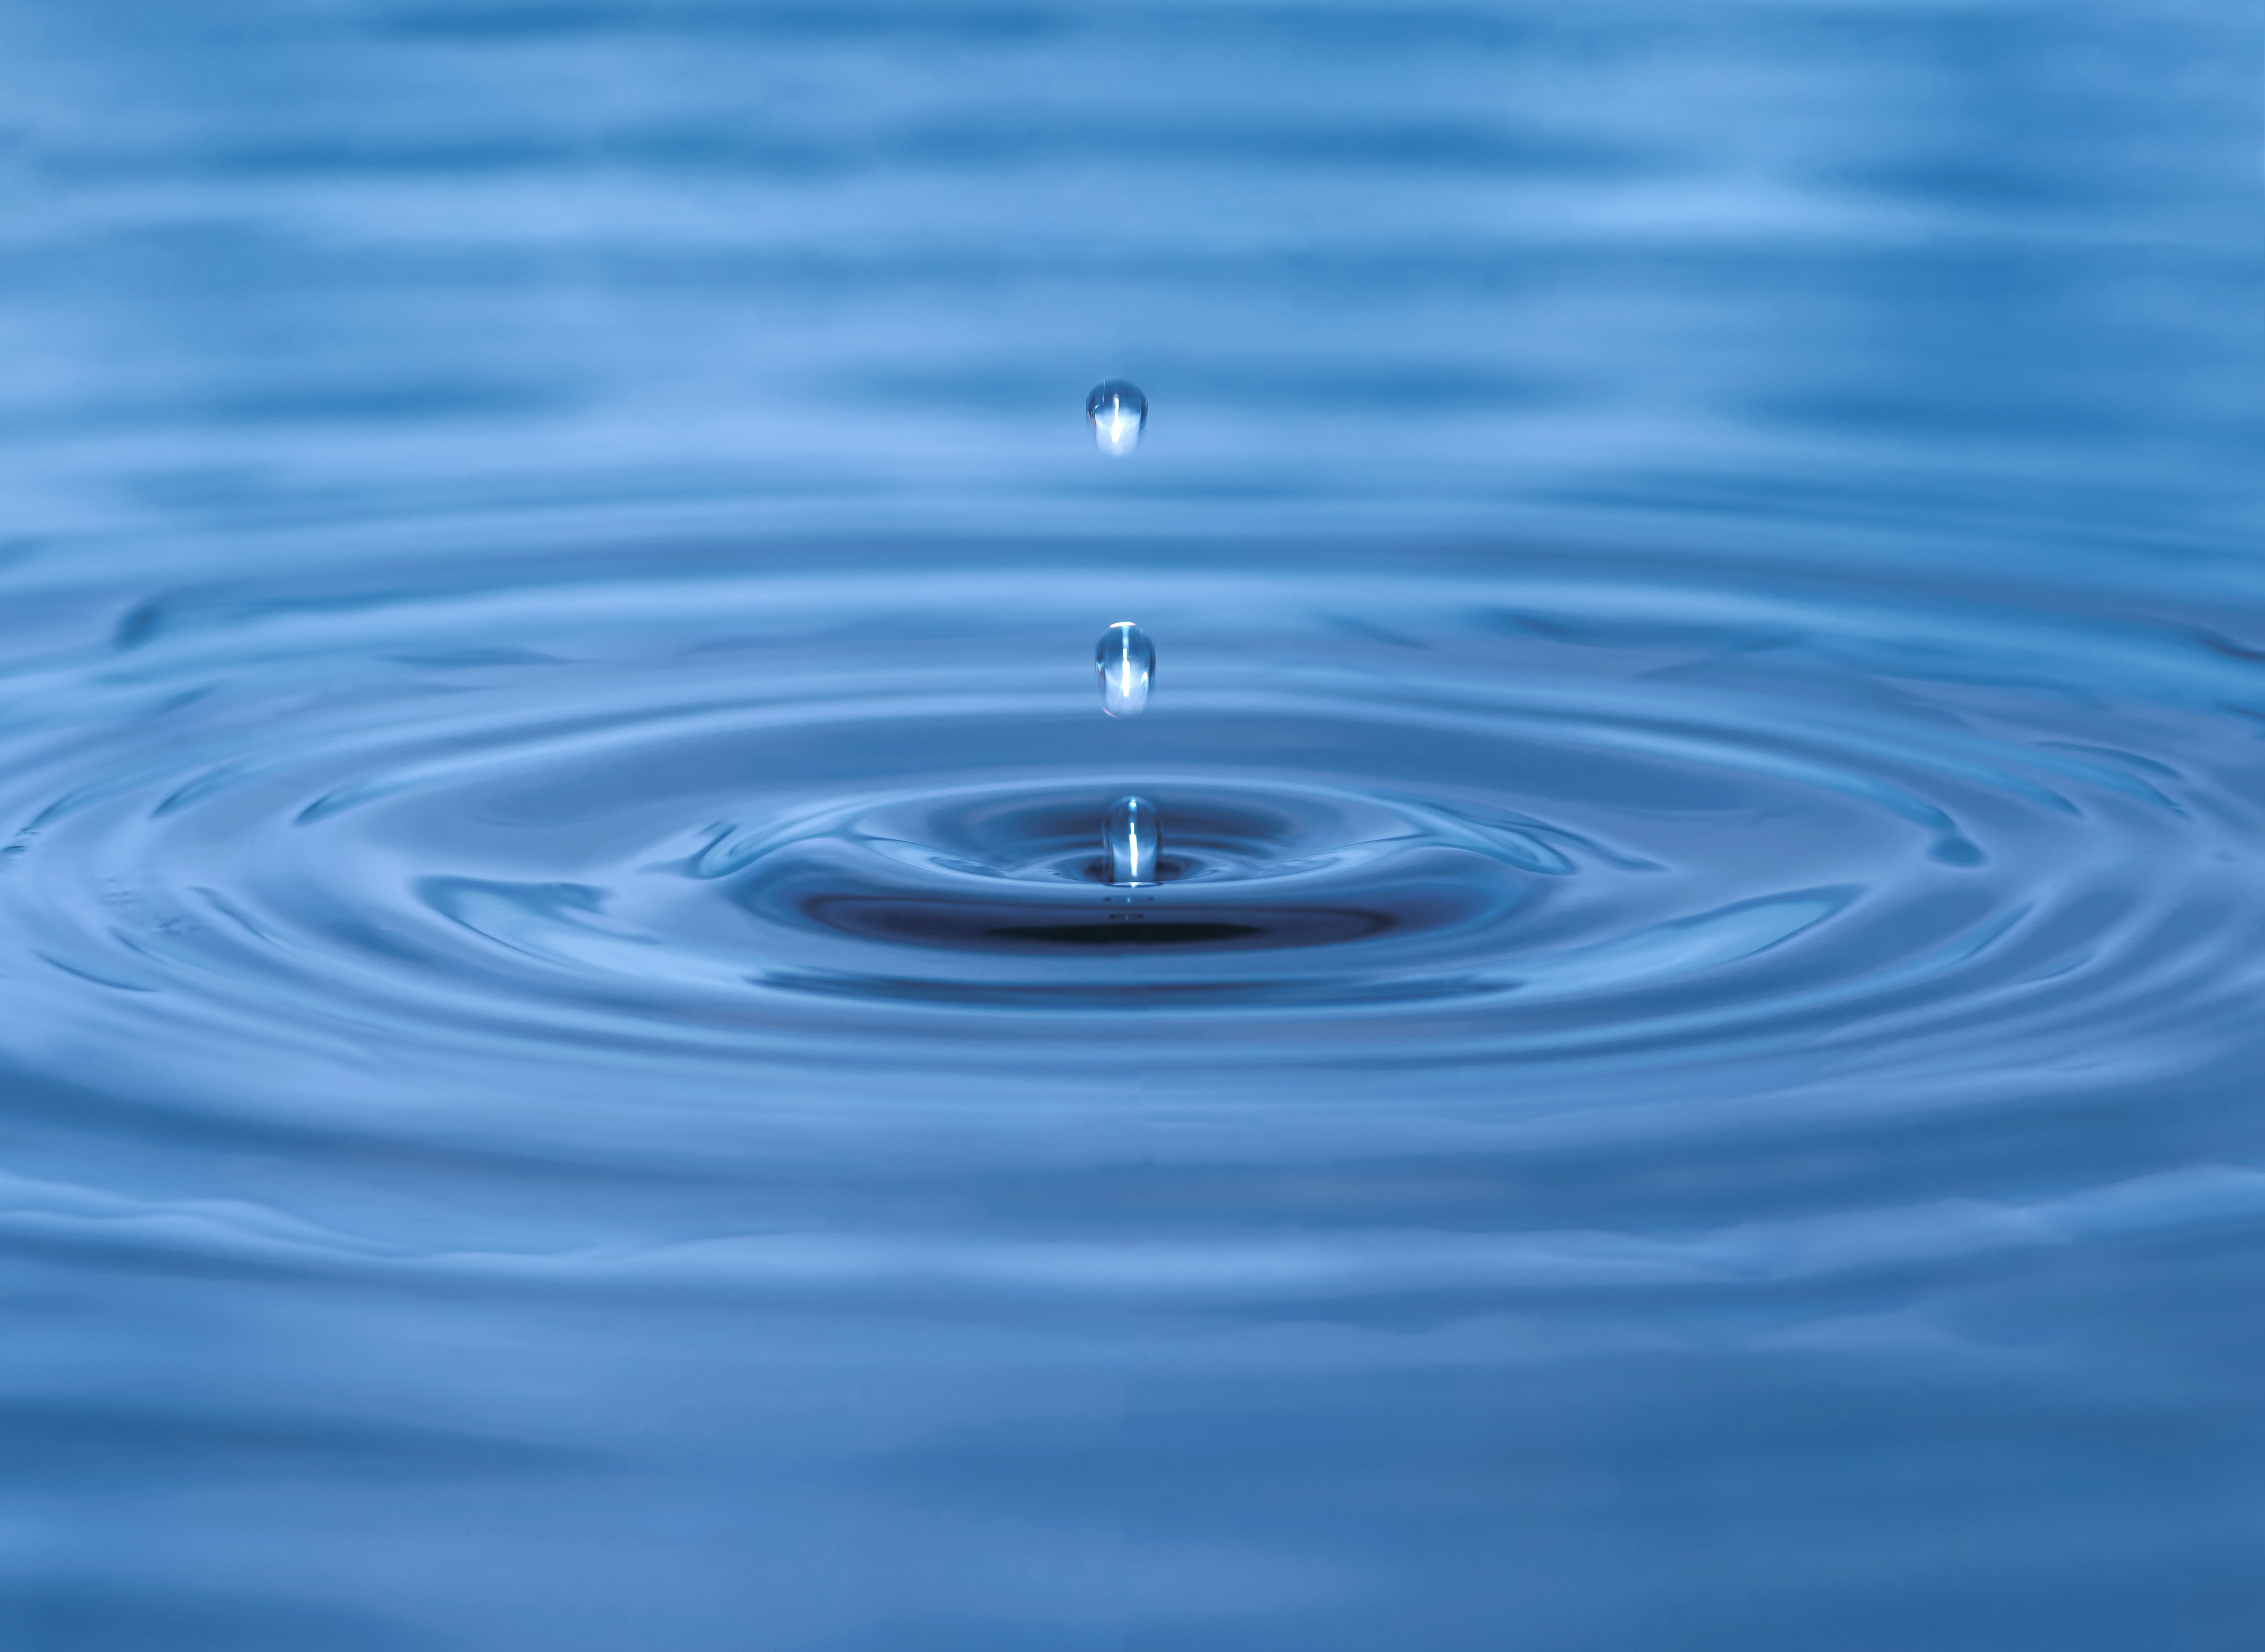 Water droplet creates ripples in surface of water